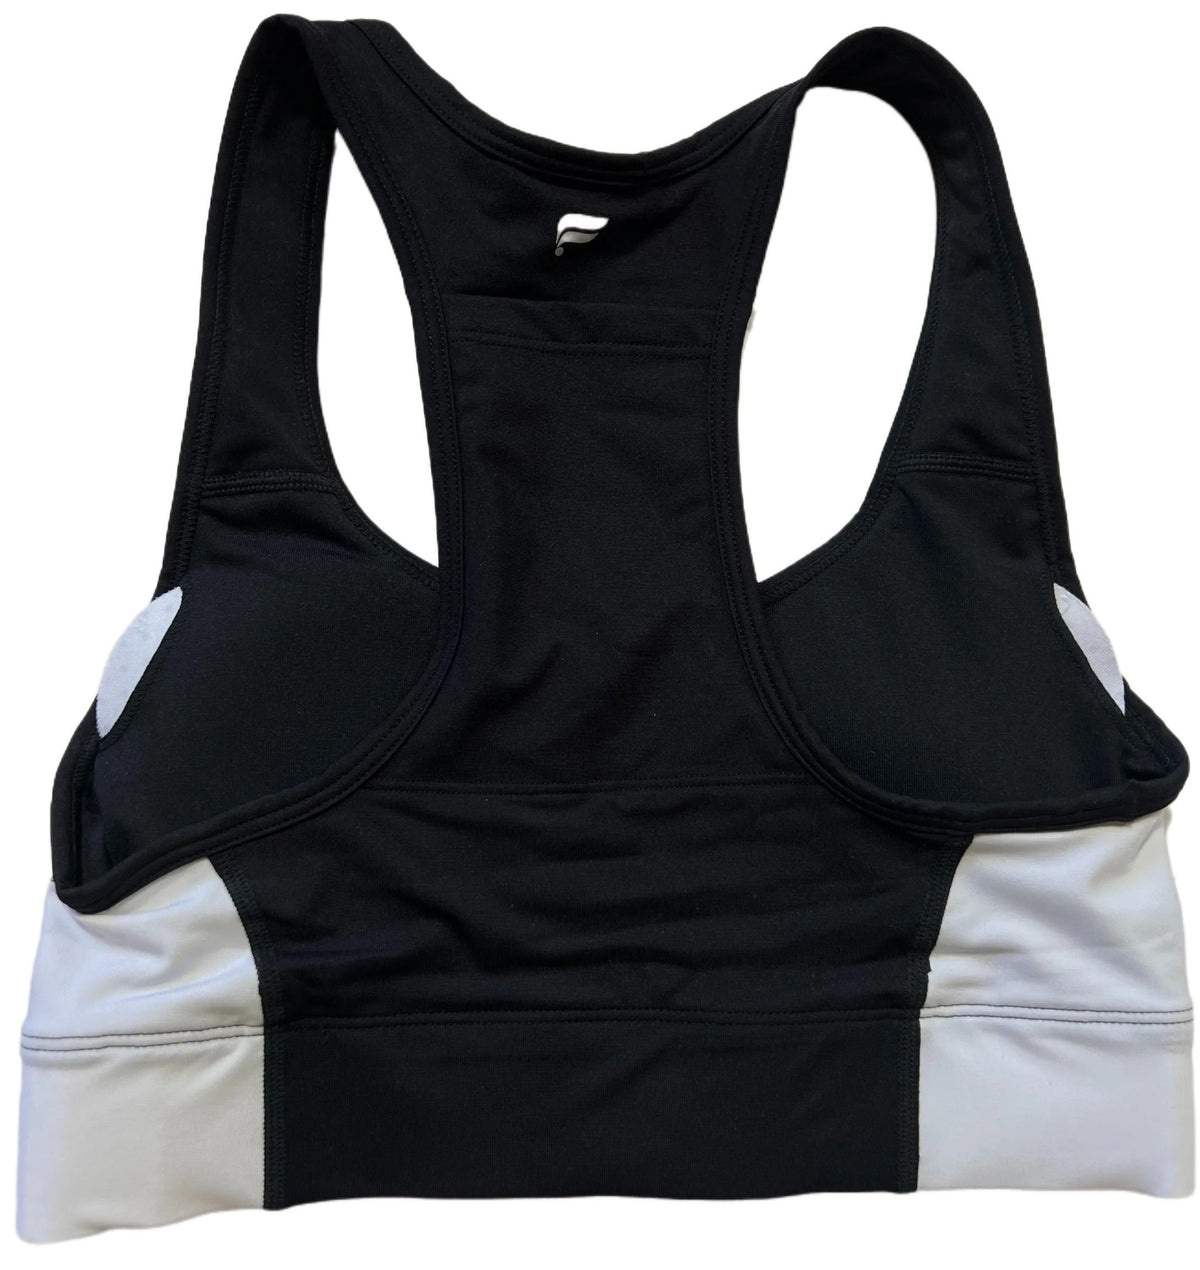 Fabletics- Black and White Sports Bra - NEW WITH TAGS